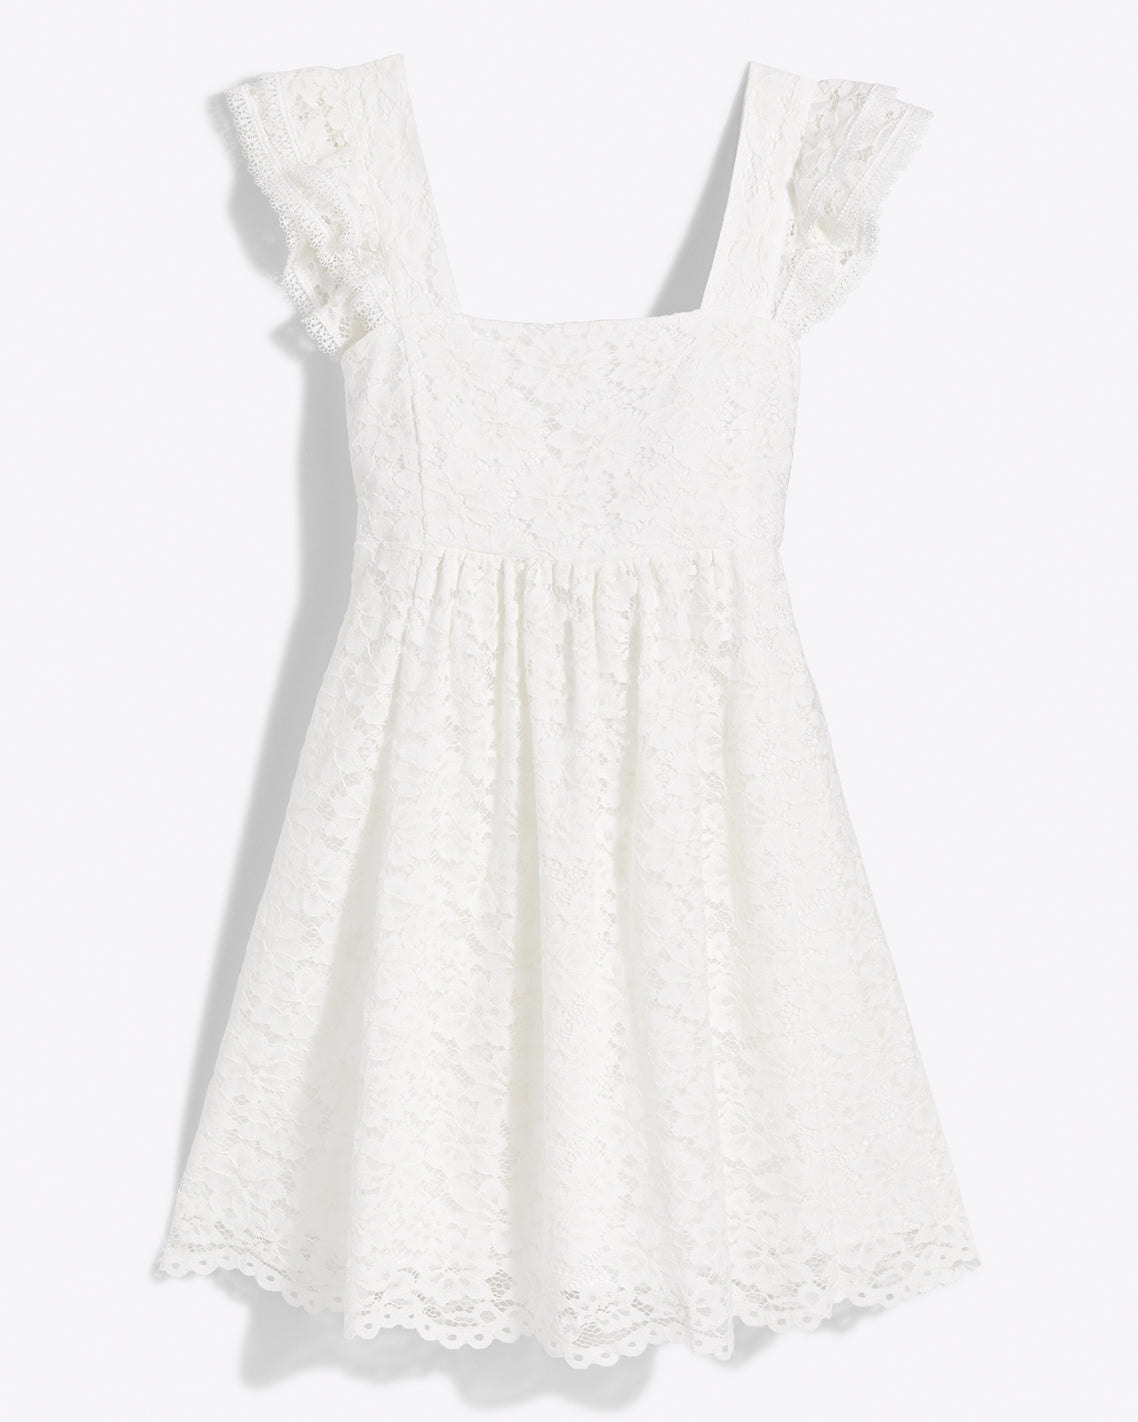 Maddie Babydoll Dress in Lace